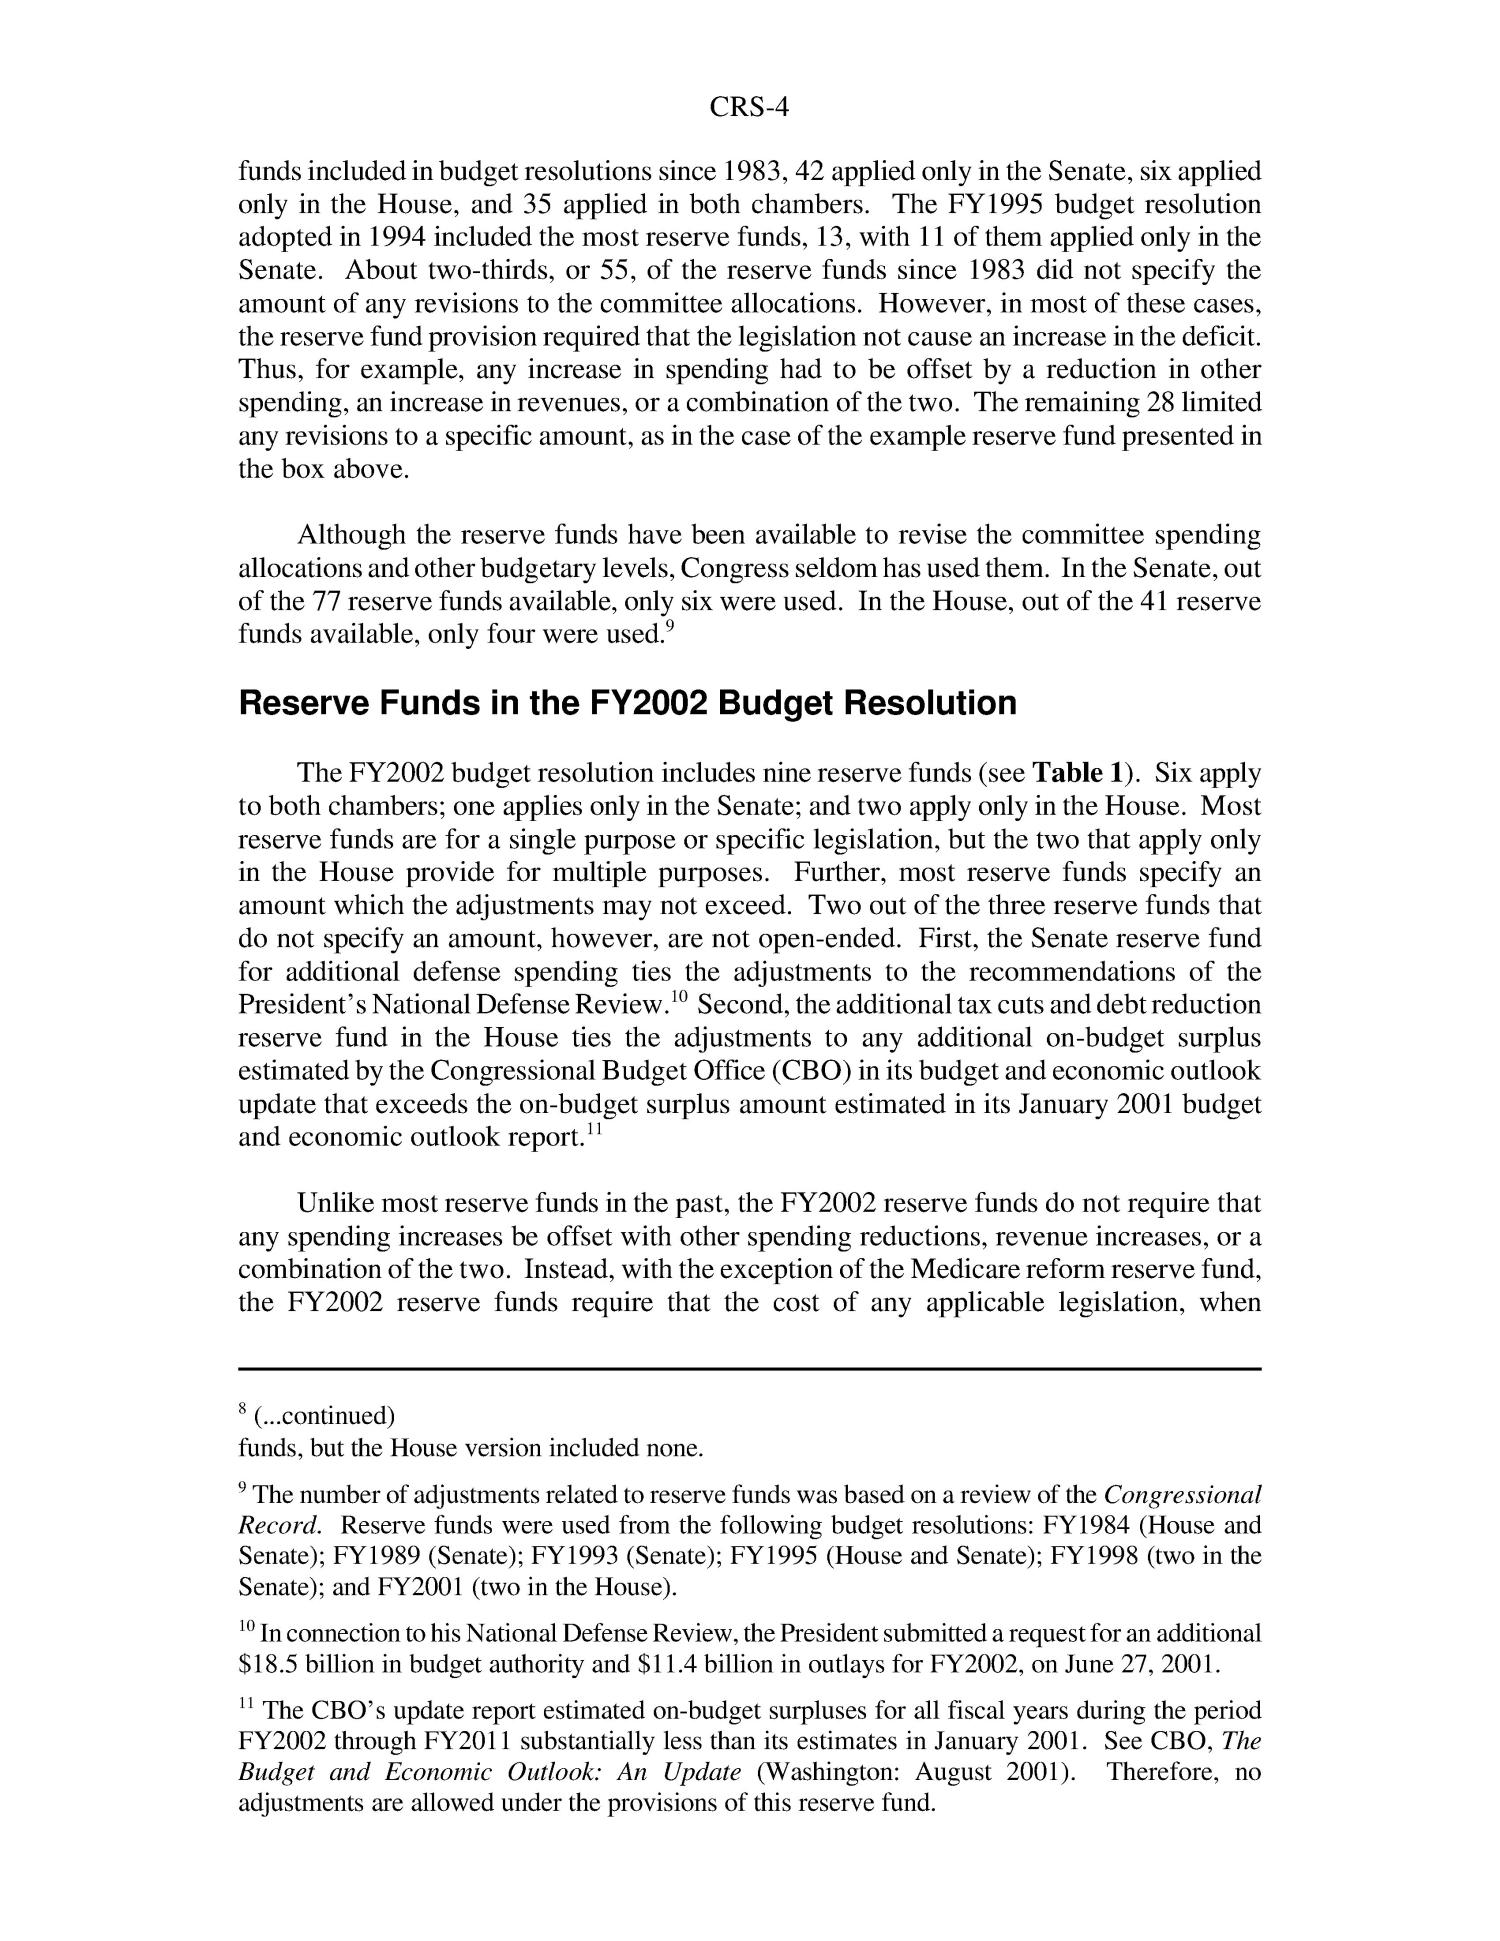 Reserve Funds in the FY2002 Budget Resolution
                                                
                                                    [Sequence #]: 4 of 6
                                                